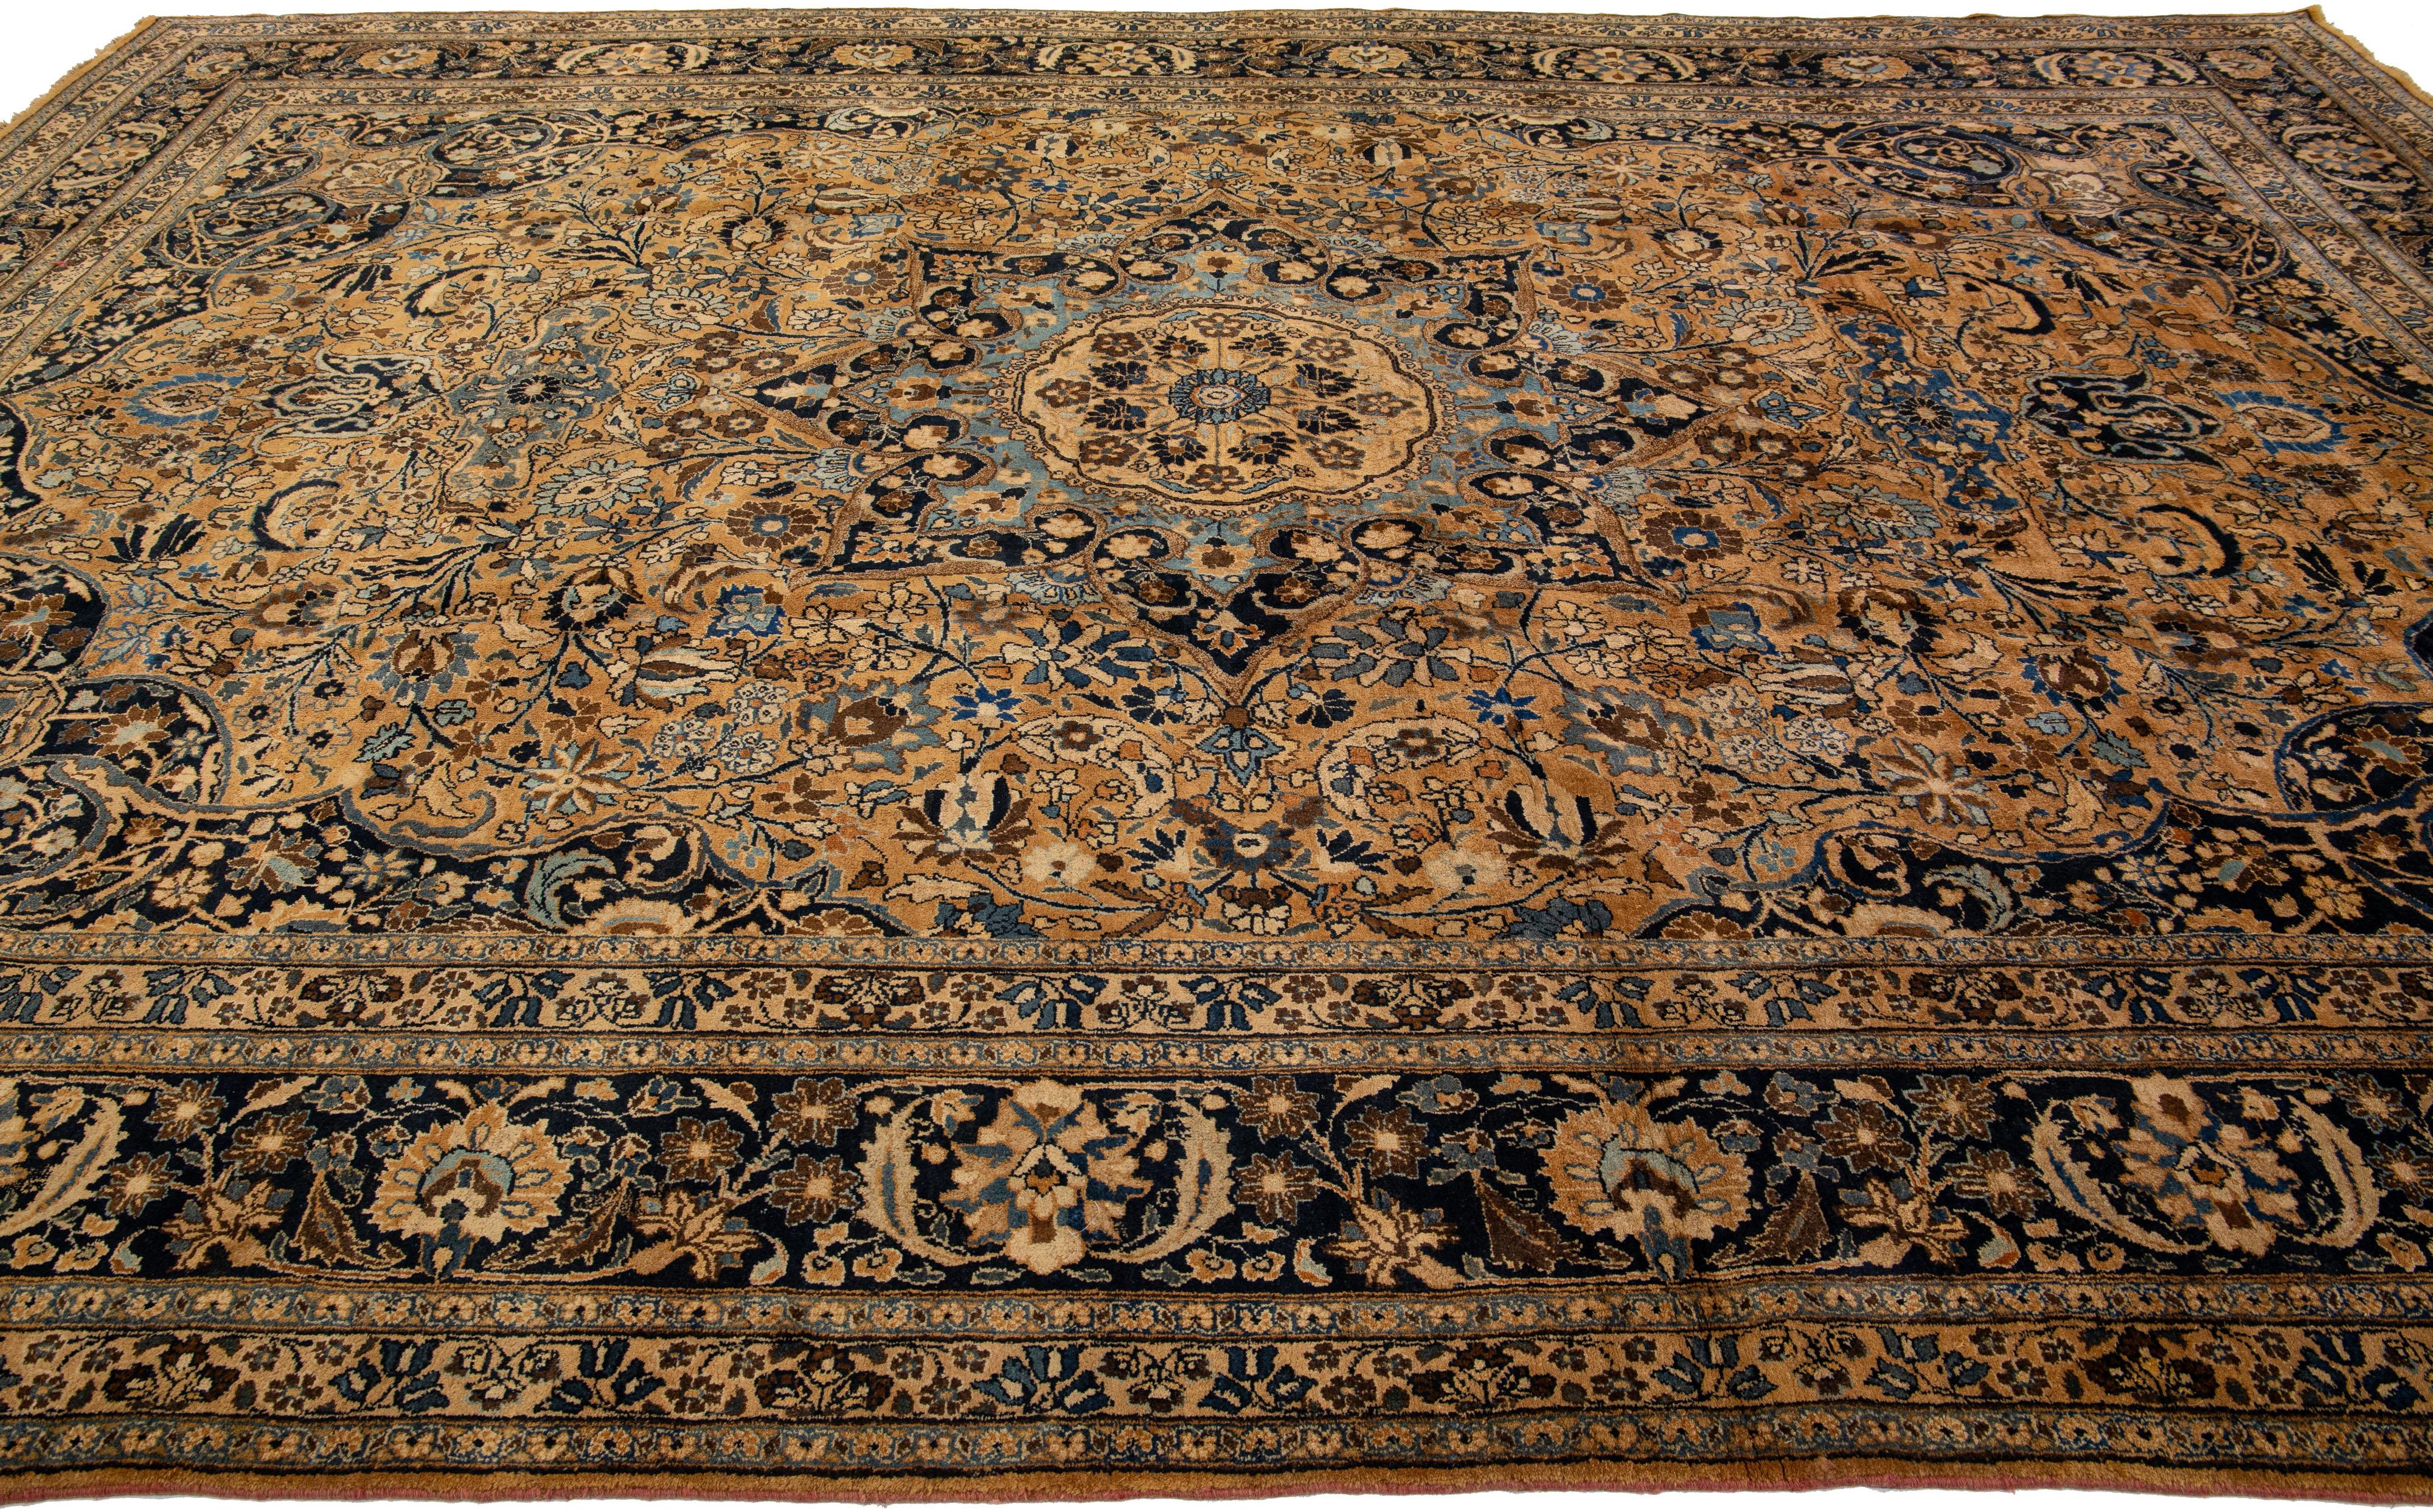 Antique Persian Mashad Tan Handmade Rosette Motif Wool Rug In Good Condition For Sale In Norwalk, CT